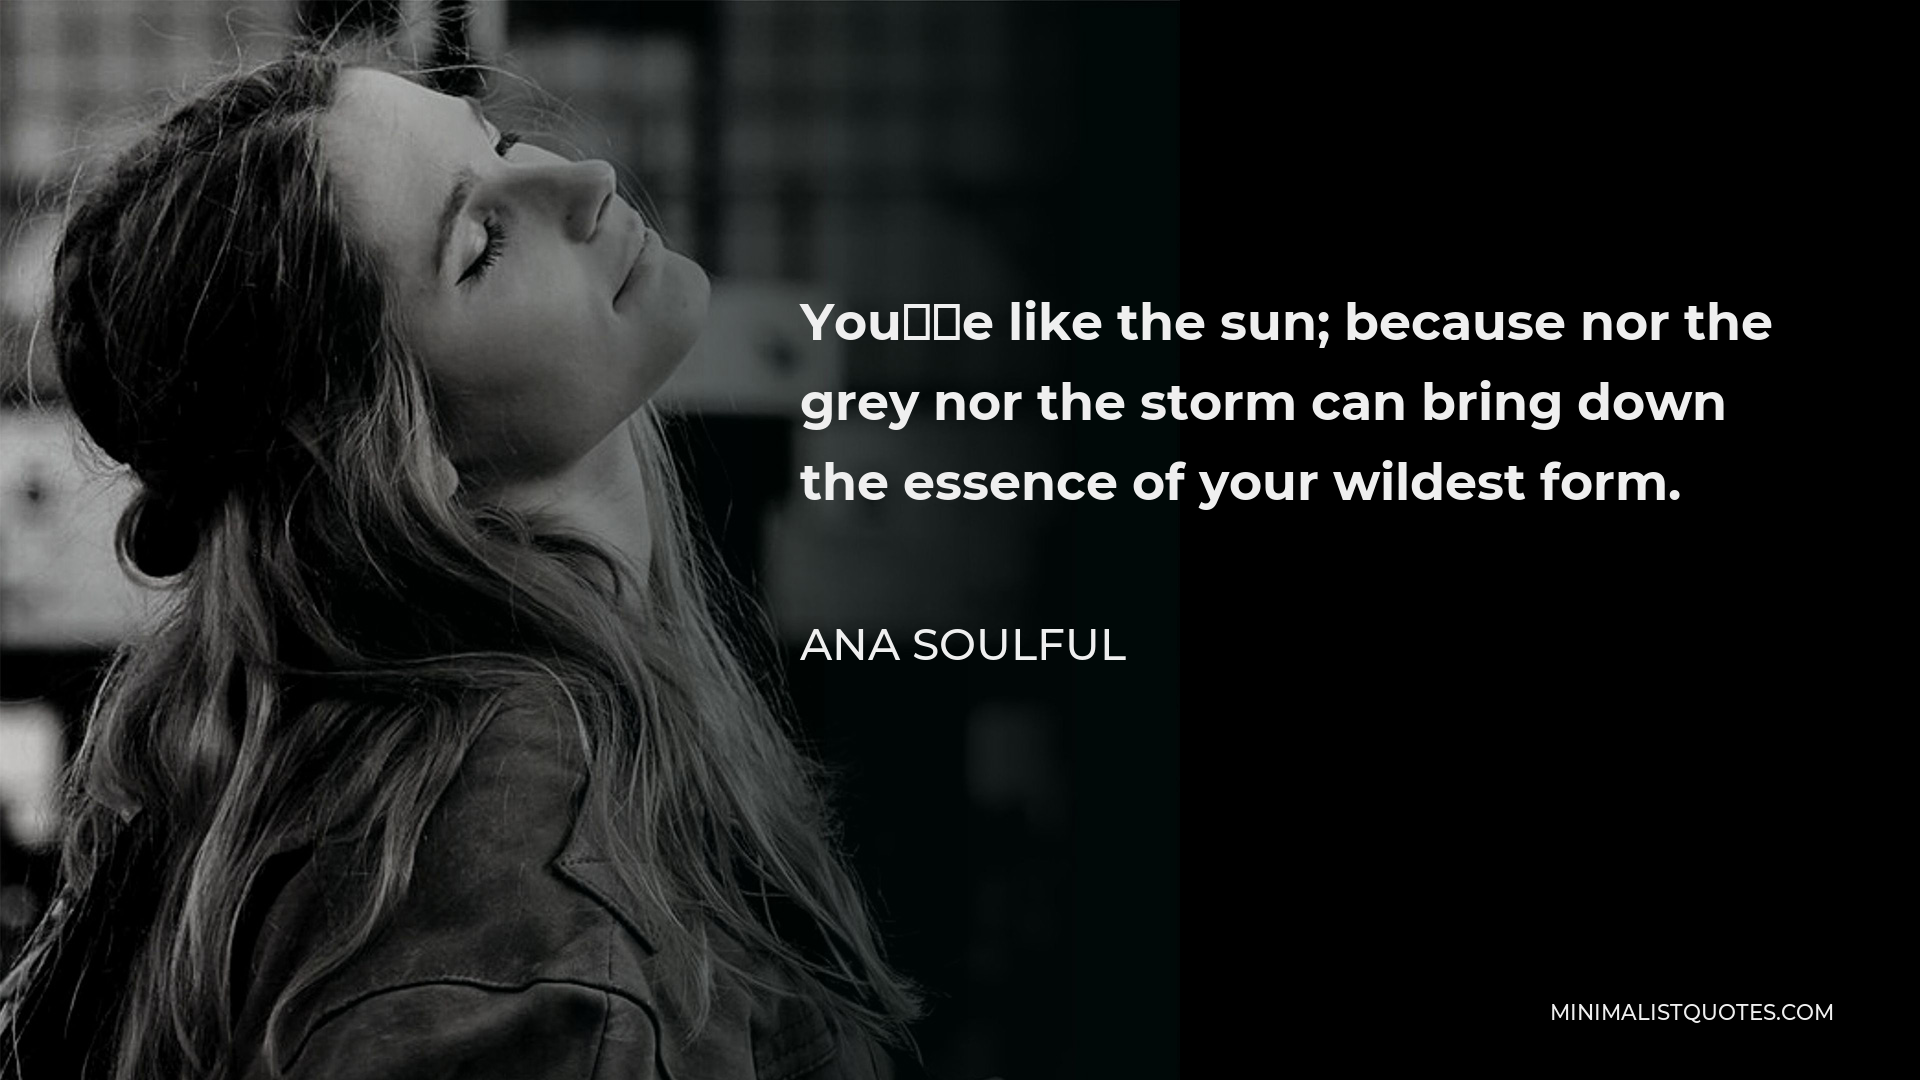 Ana Soulful Quote - You’re like the sun; because nor the grey nor the storm can bring down the essence of your wildest form.